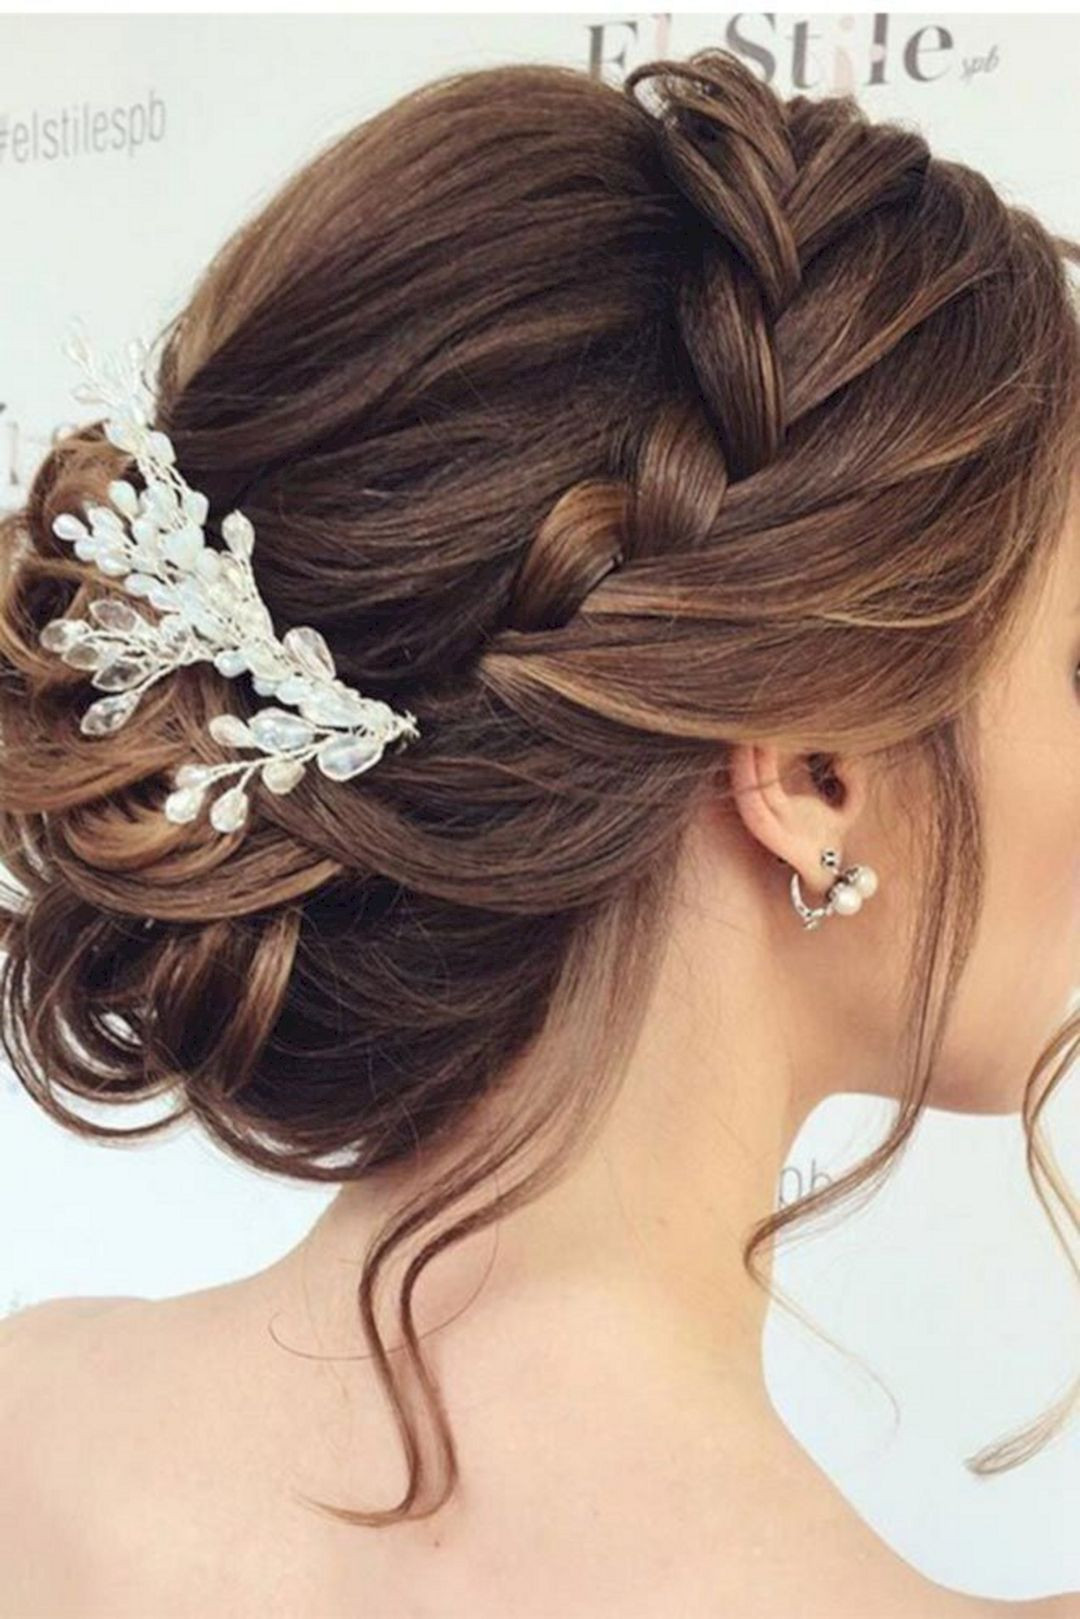 Updo Hairstyles For Wedding Bridesmaid
 Bridesmaid Updo Hairstyles Long Hair – OOSILE